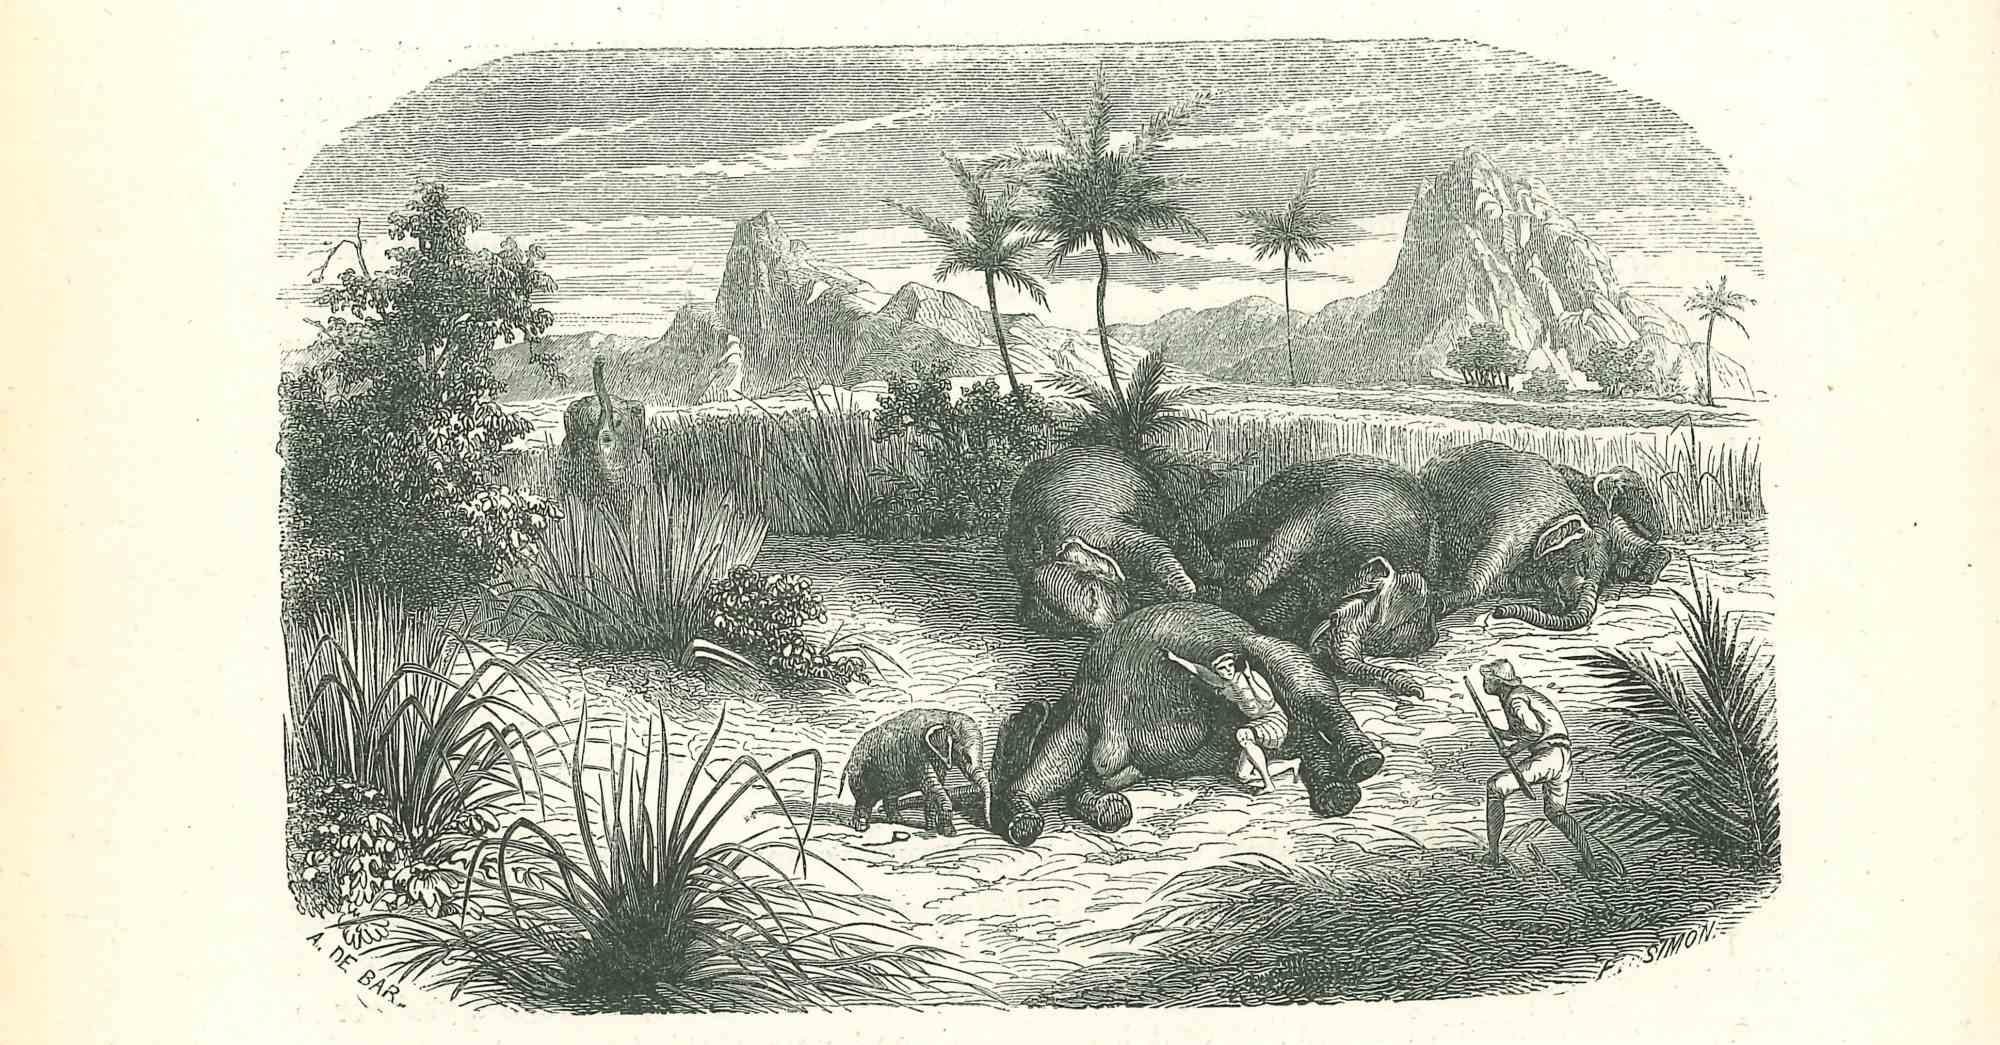 The Dead Elephants is an original lithograph on ivory-colored paper, realized by Paul Gervais (1816-1879). The artwork is from The Series of "Les Trois Règnes de la Nature", and was published in 1854.

Good conditions.

Titled on the lower.

The